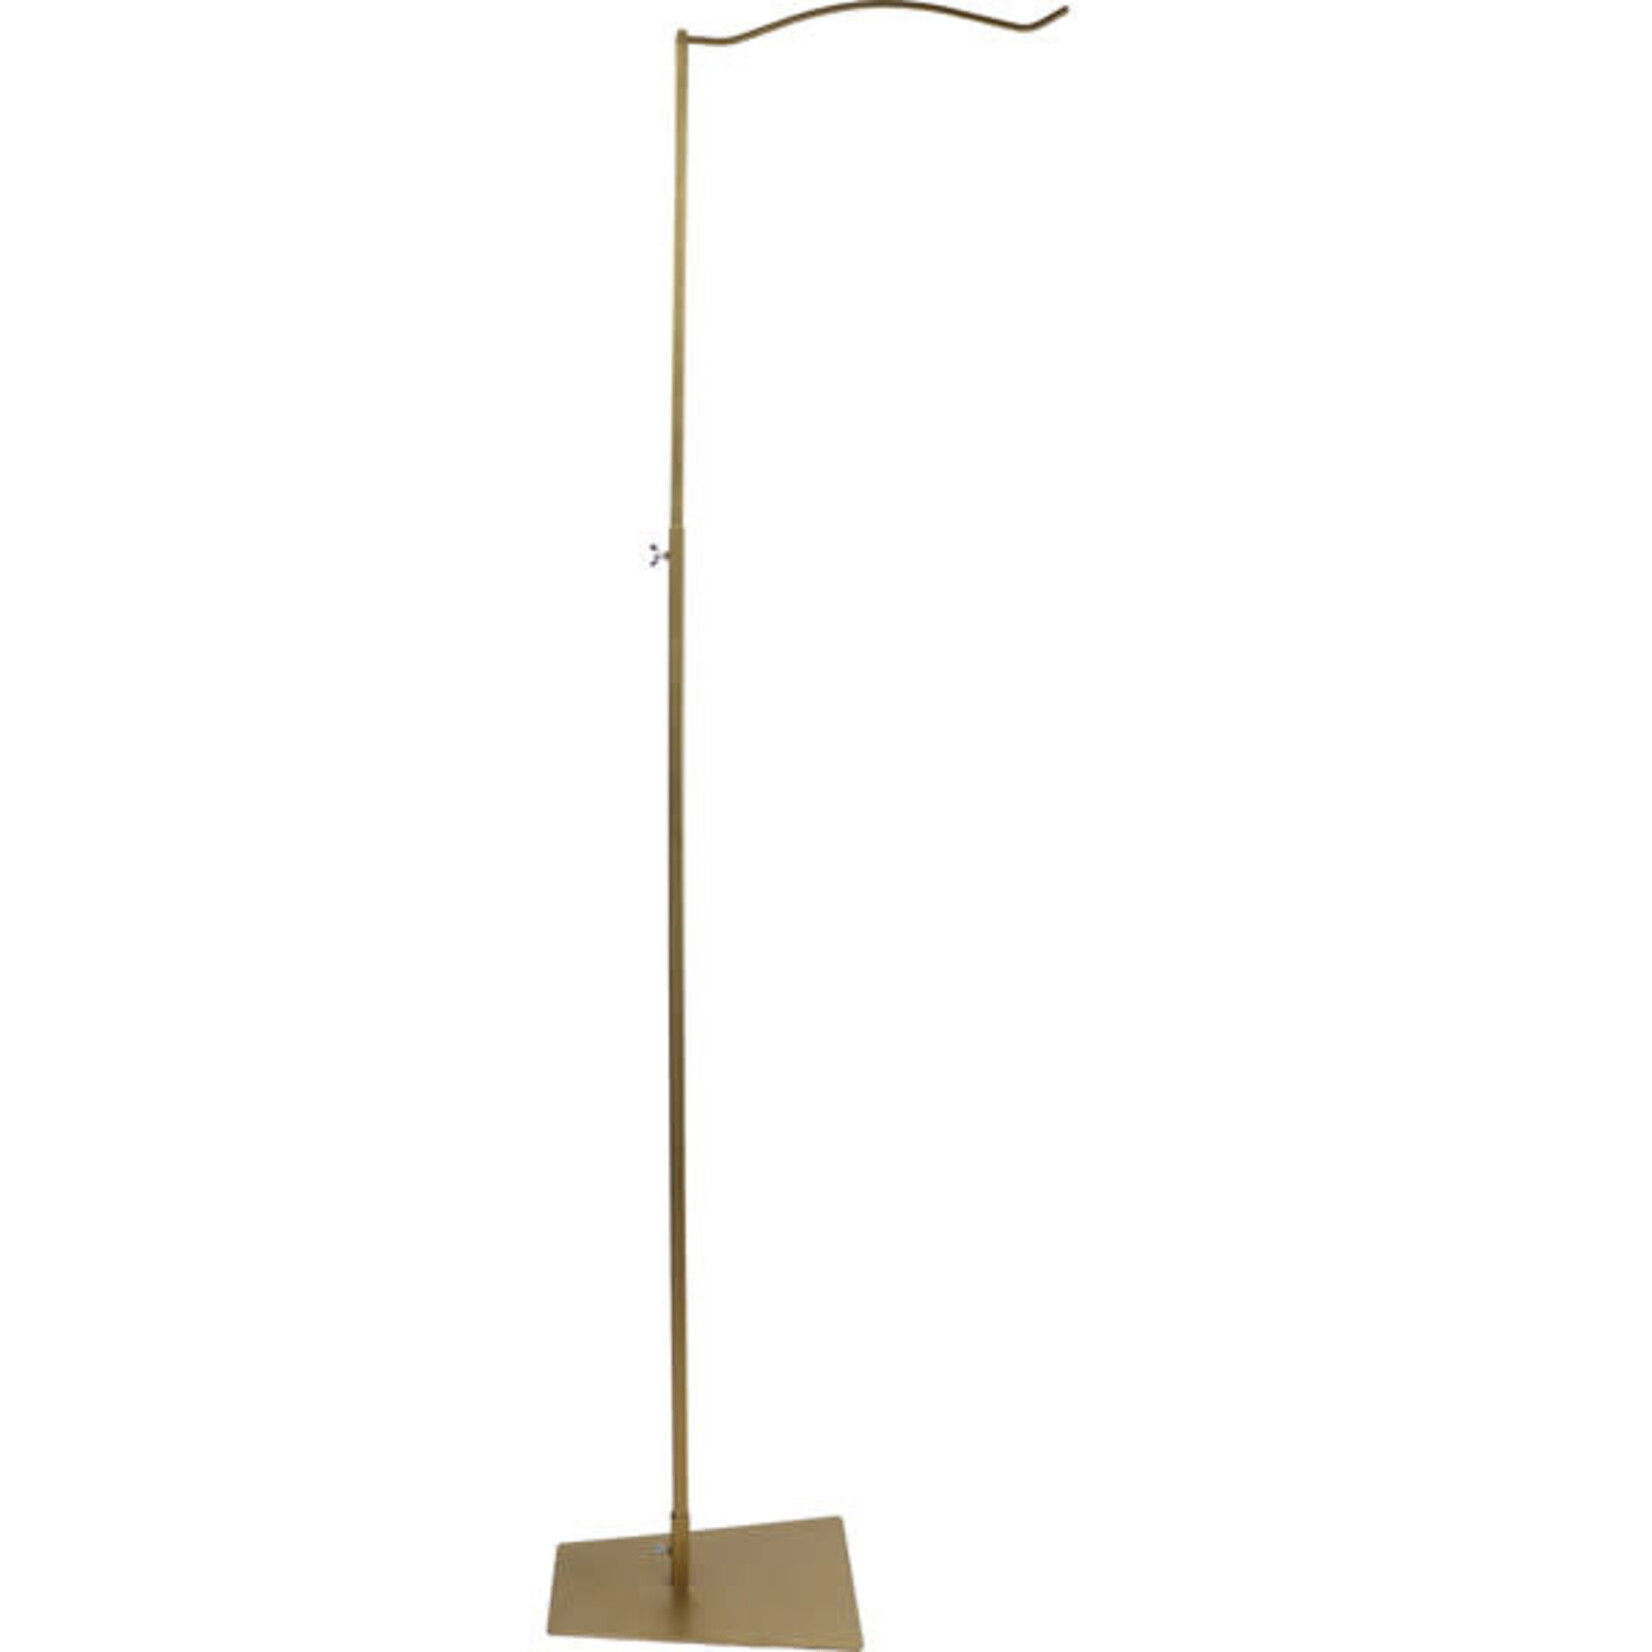 Tryco Tryco - Adjustable canopy holder - Gold